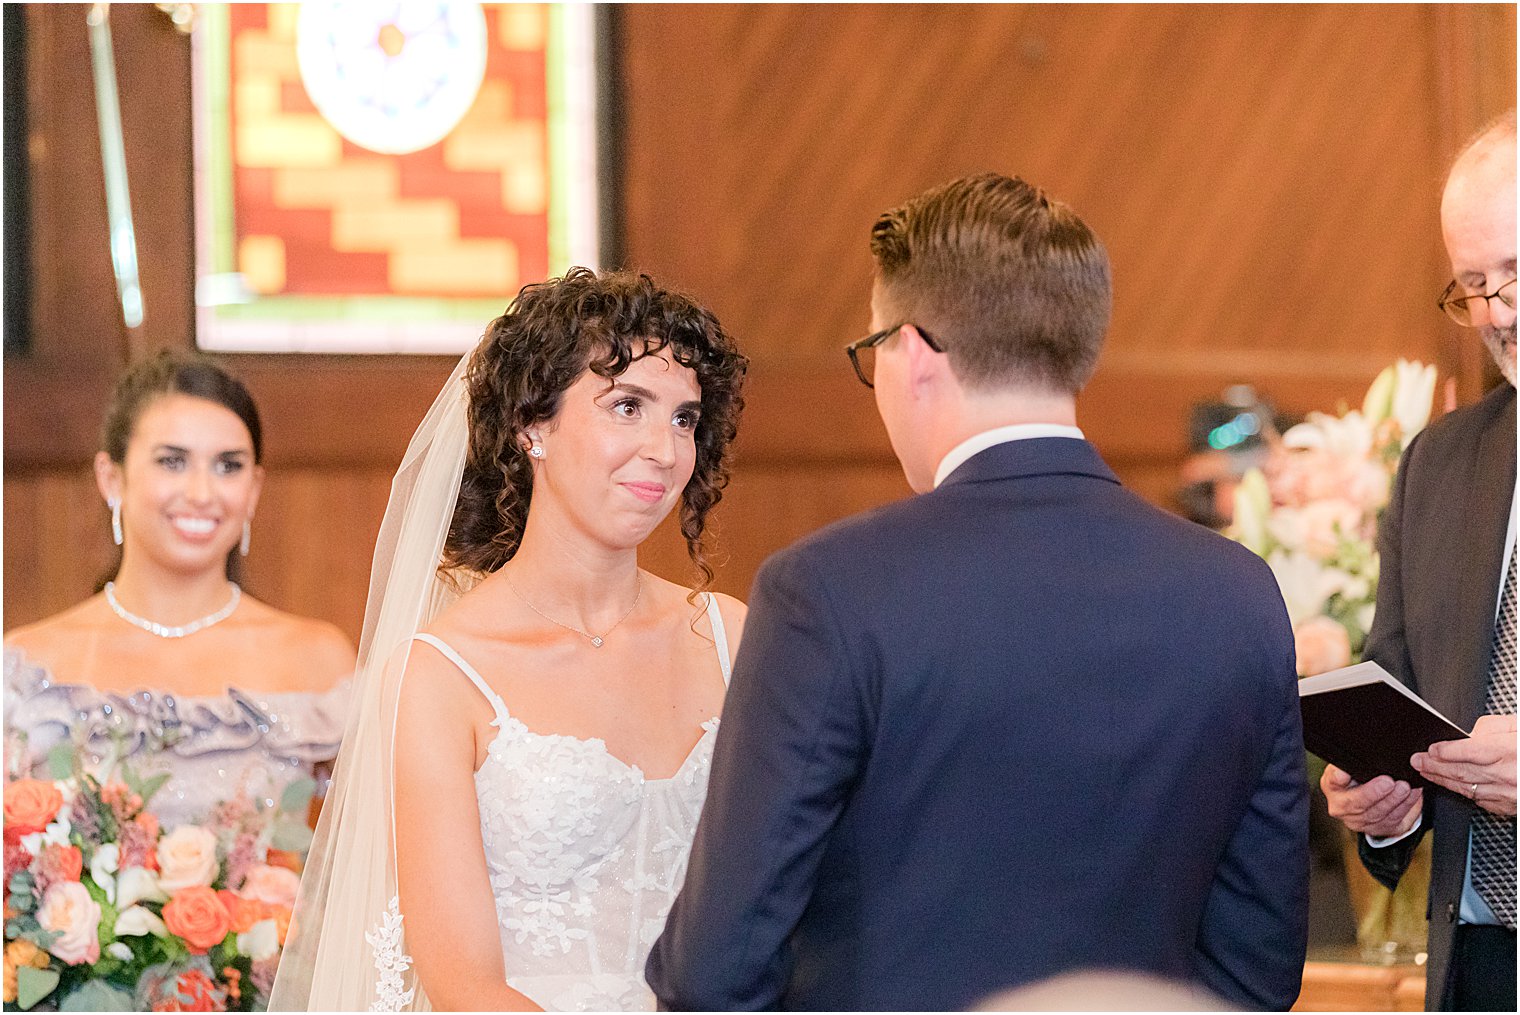 bride smiles at groom during wedding ceremony at St. Andrew's United Methodist Church